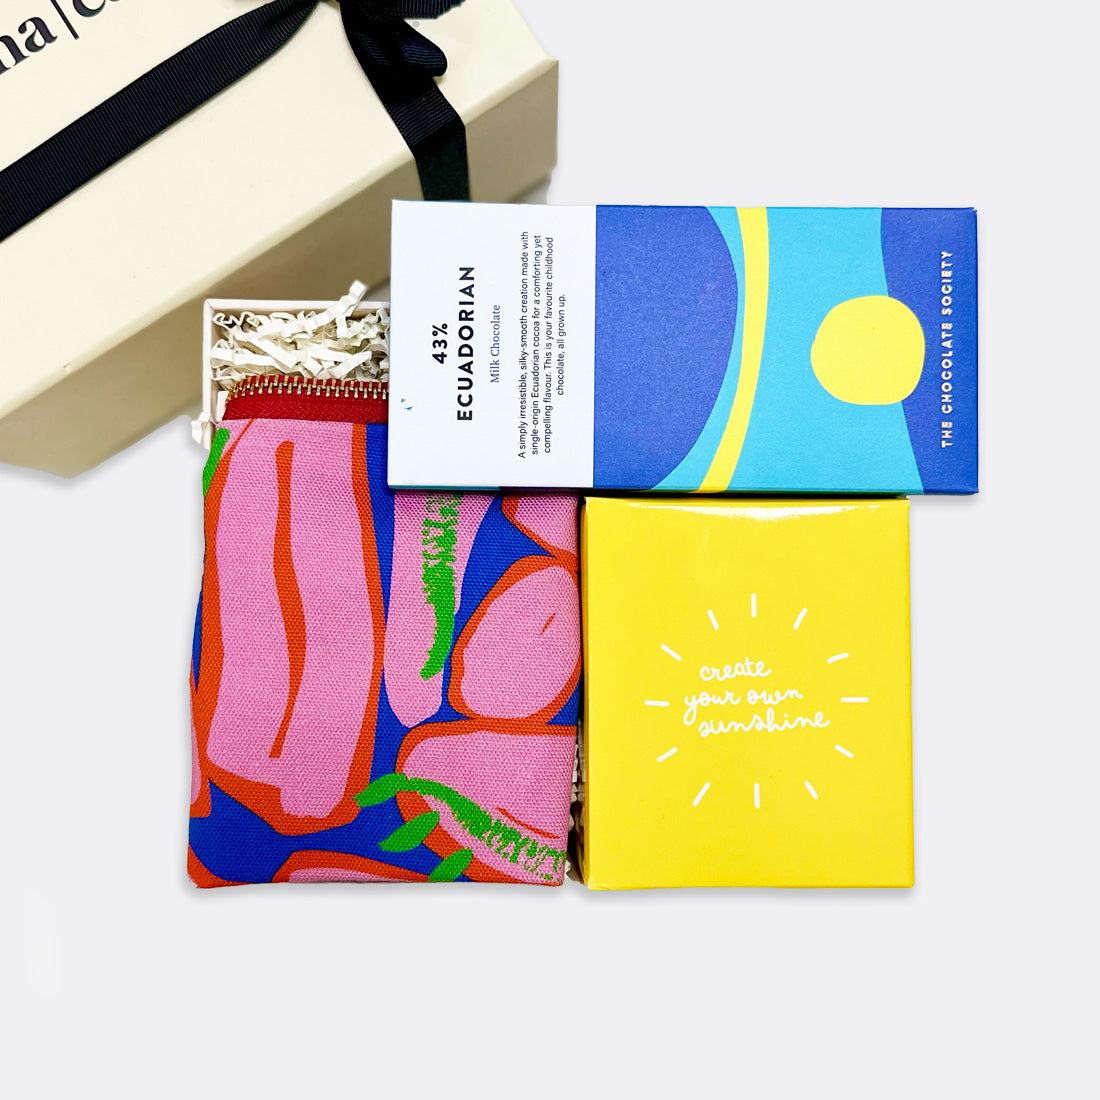 Artsy Zip case Create Your Own Sunshine Candle Ecuadorian Milk Chocolate Bar , shop the best Christmas gift gifts for her for him from Inna carton online store dubai, UAE!